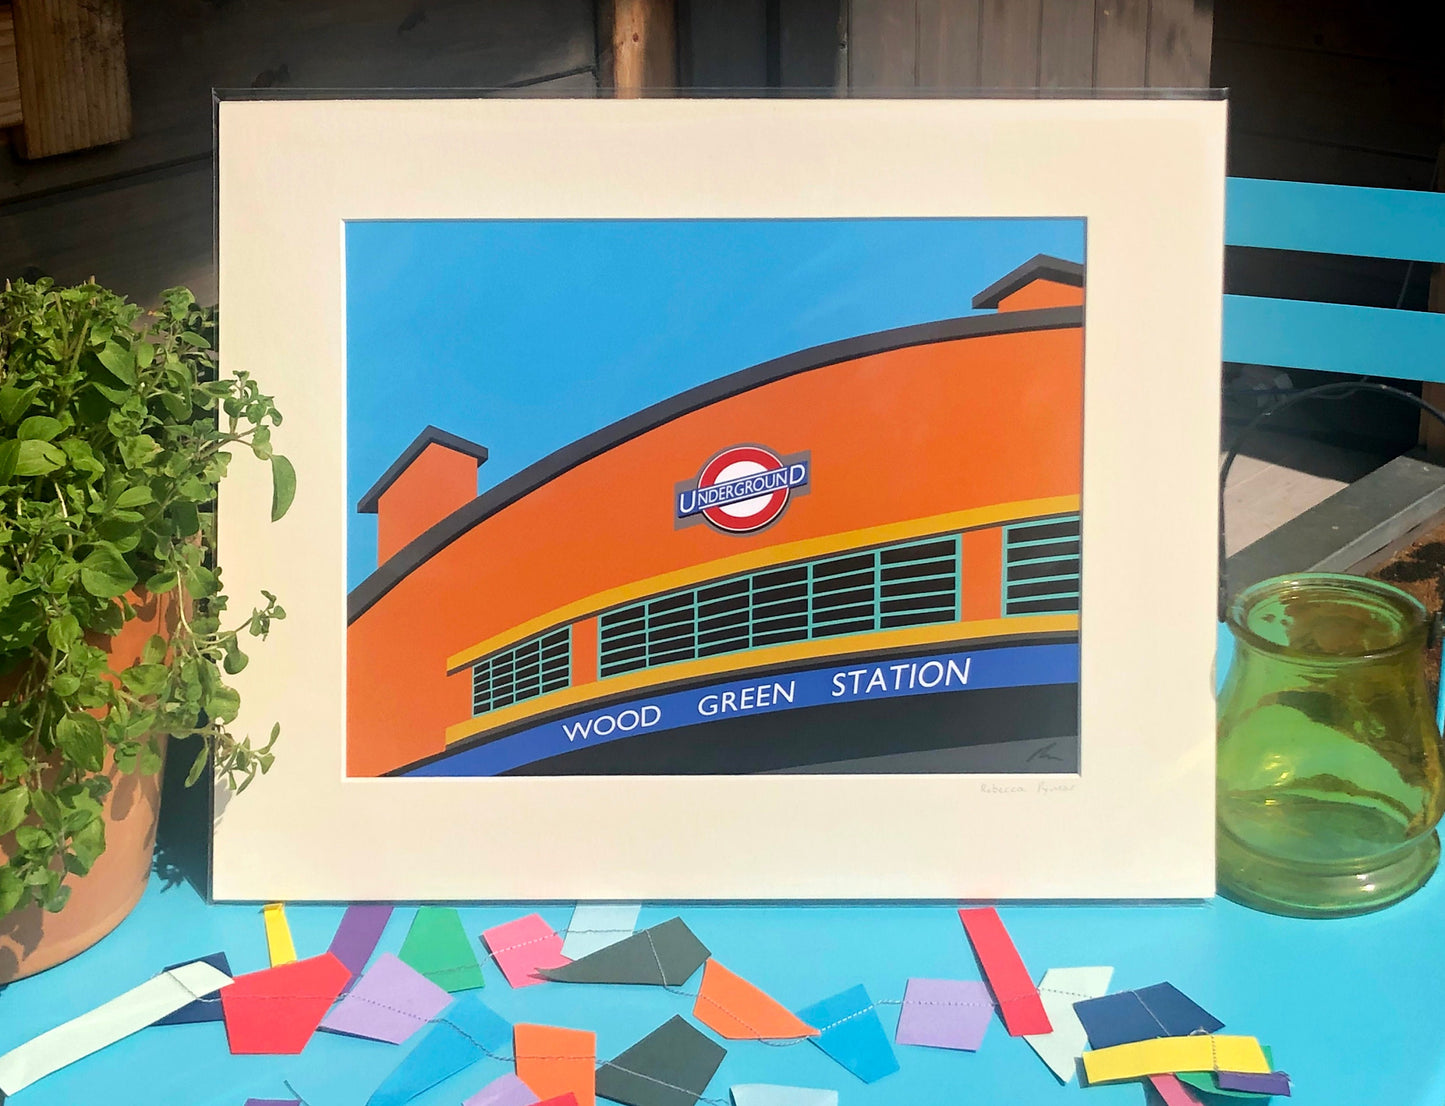 Wood Green Station - Mounted Print - London Underground illustration Travel Poster - Art Deco Tube Station Series - by Rebecca Pymar